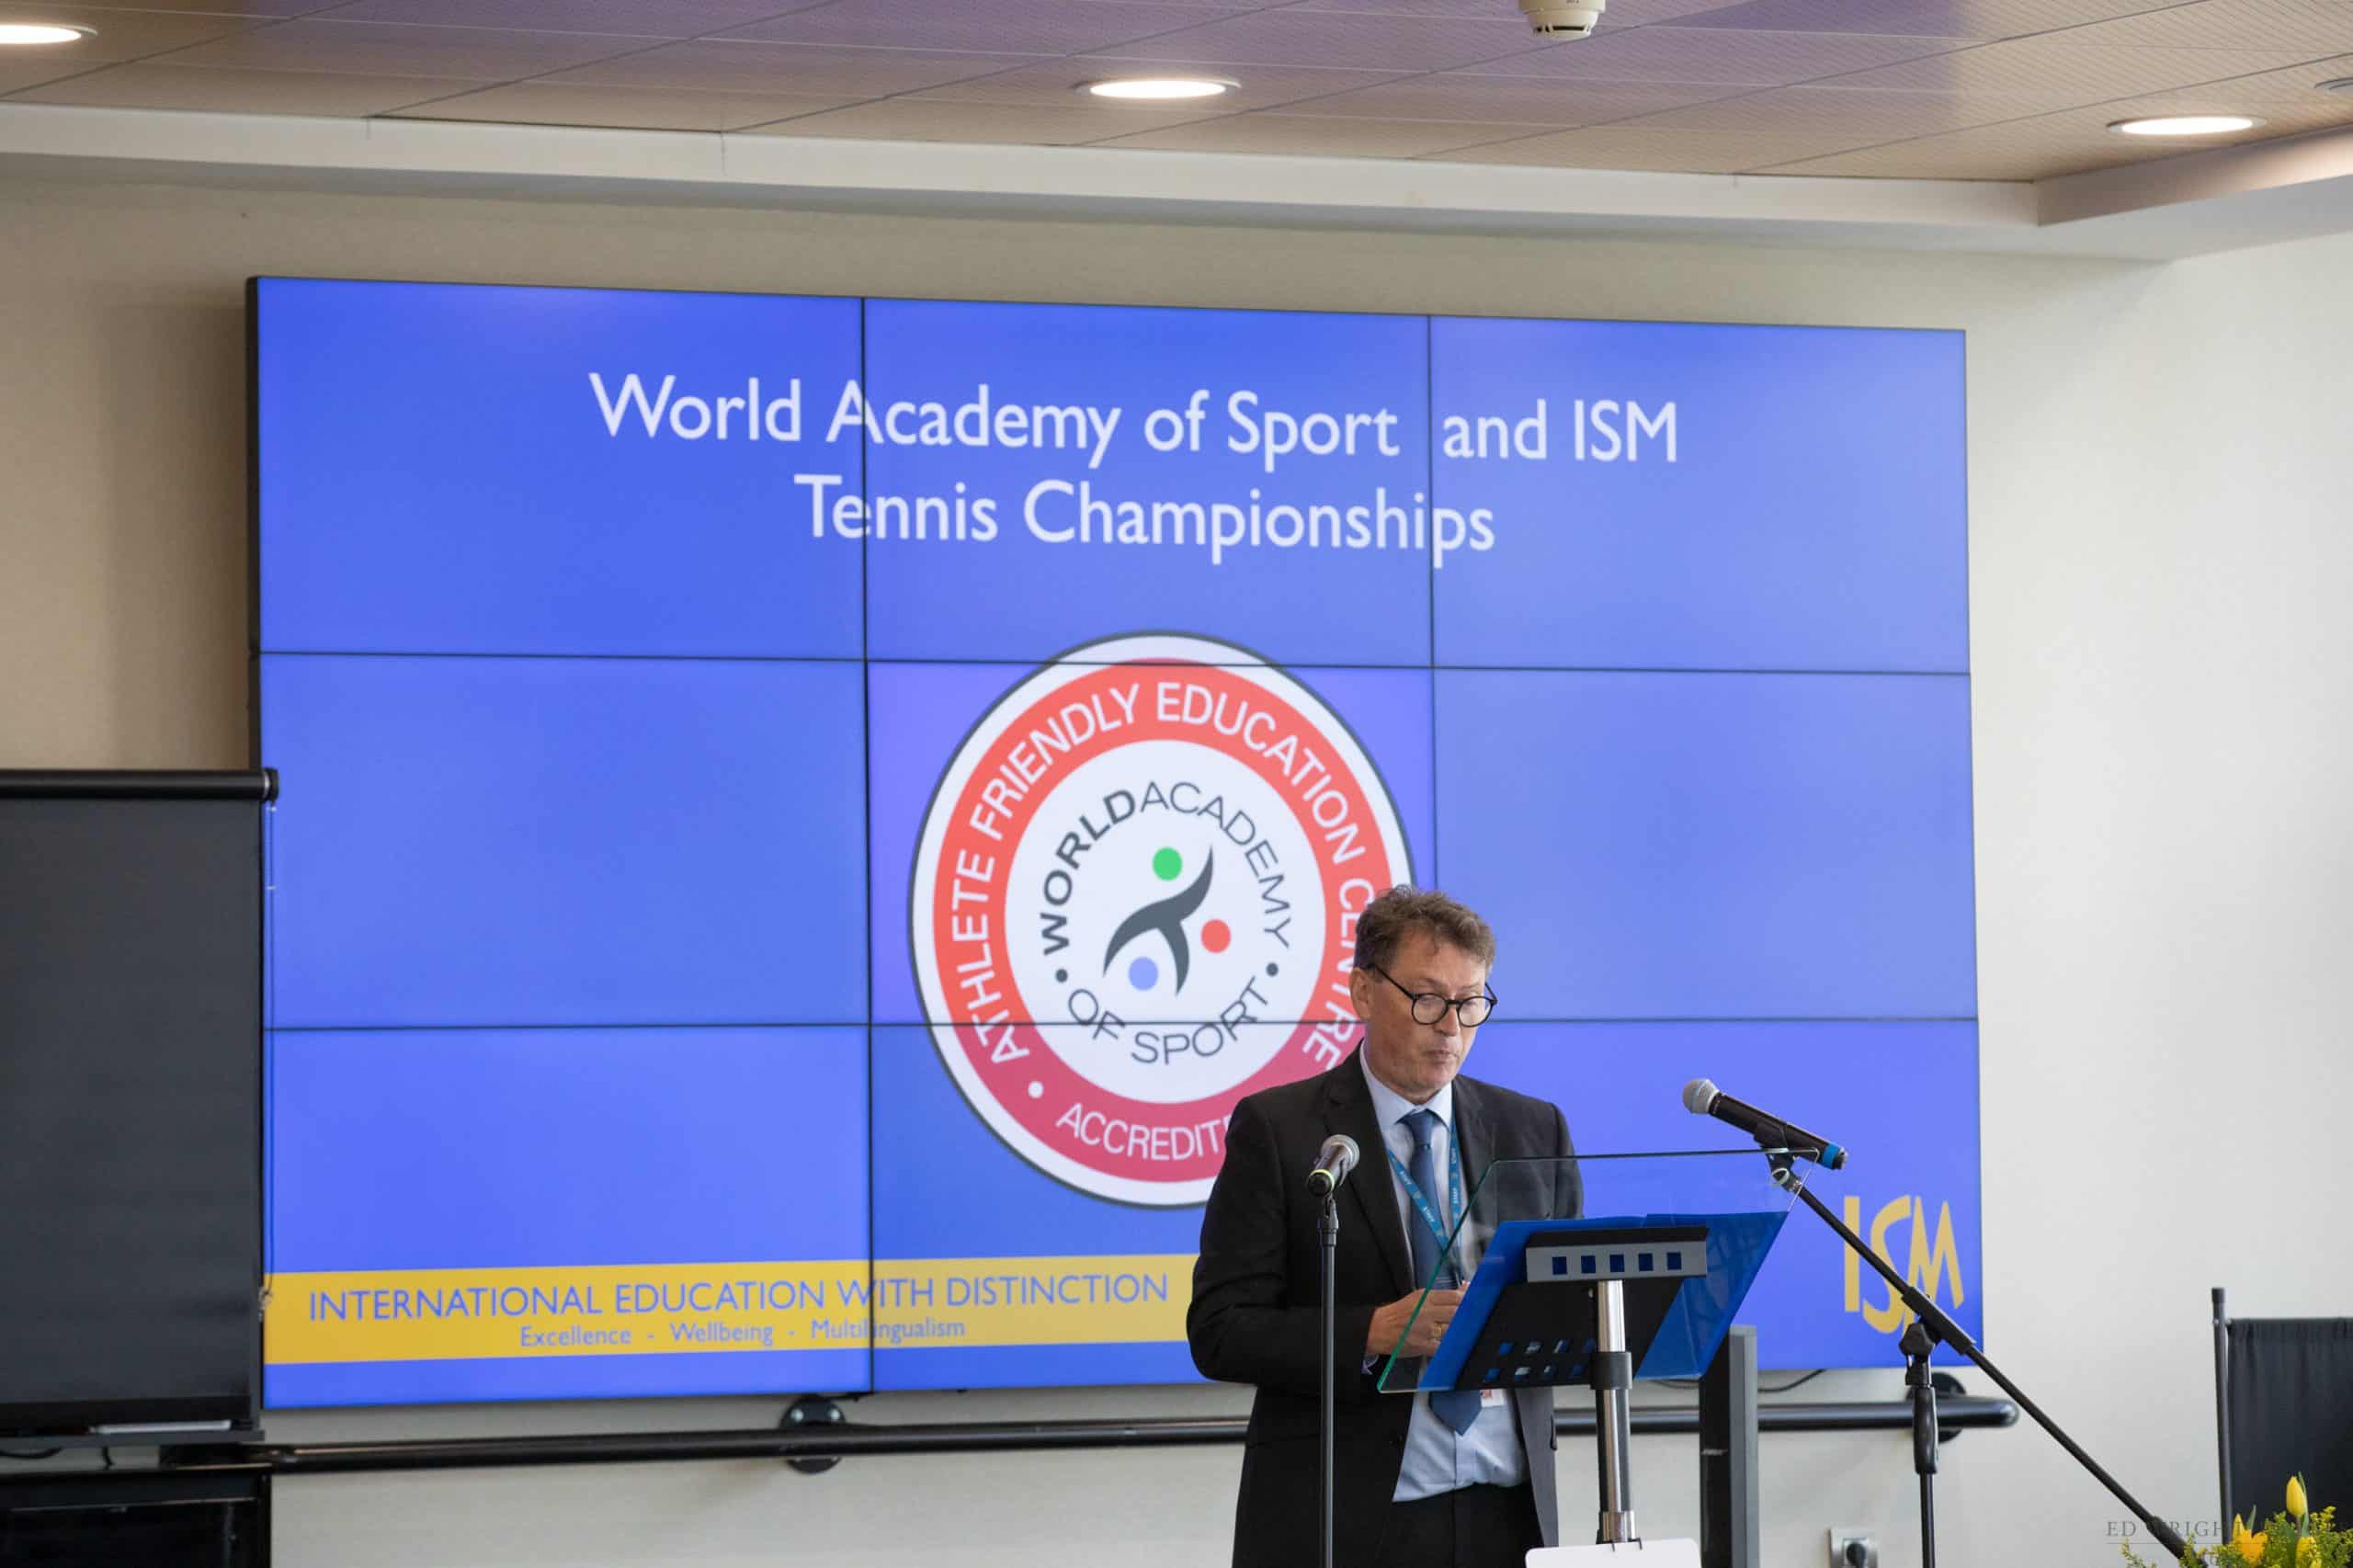 ISM and World Academy of Sport launch AFEC Championships Image